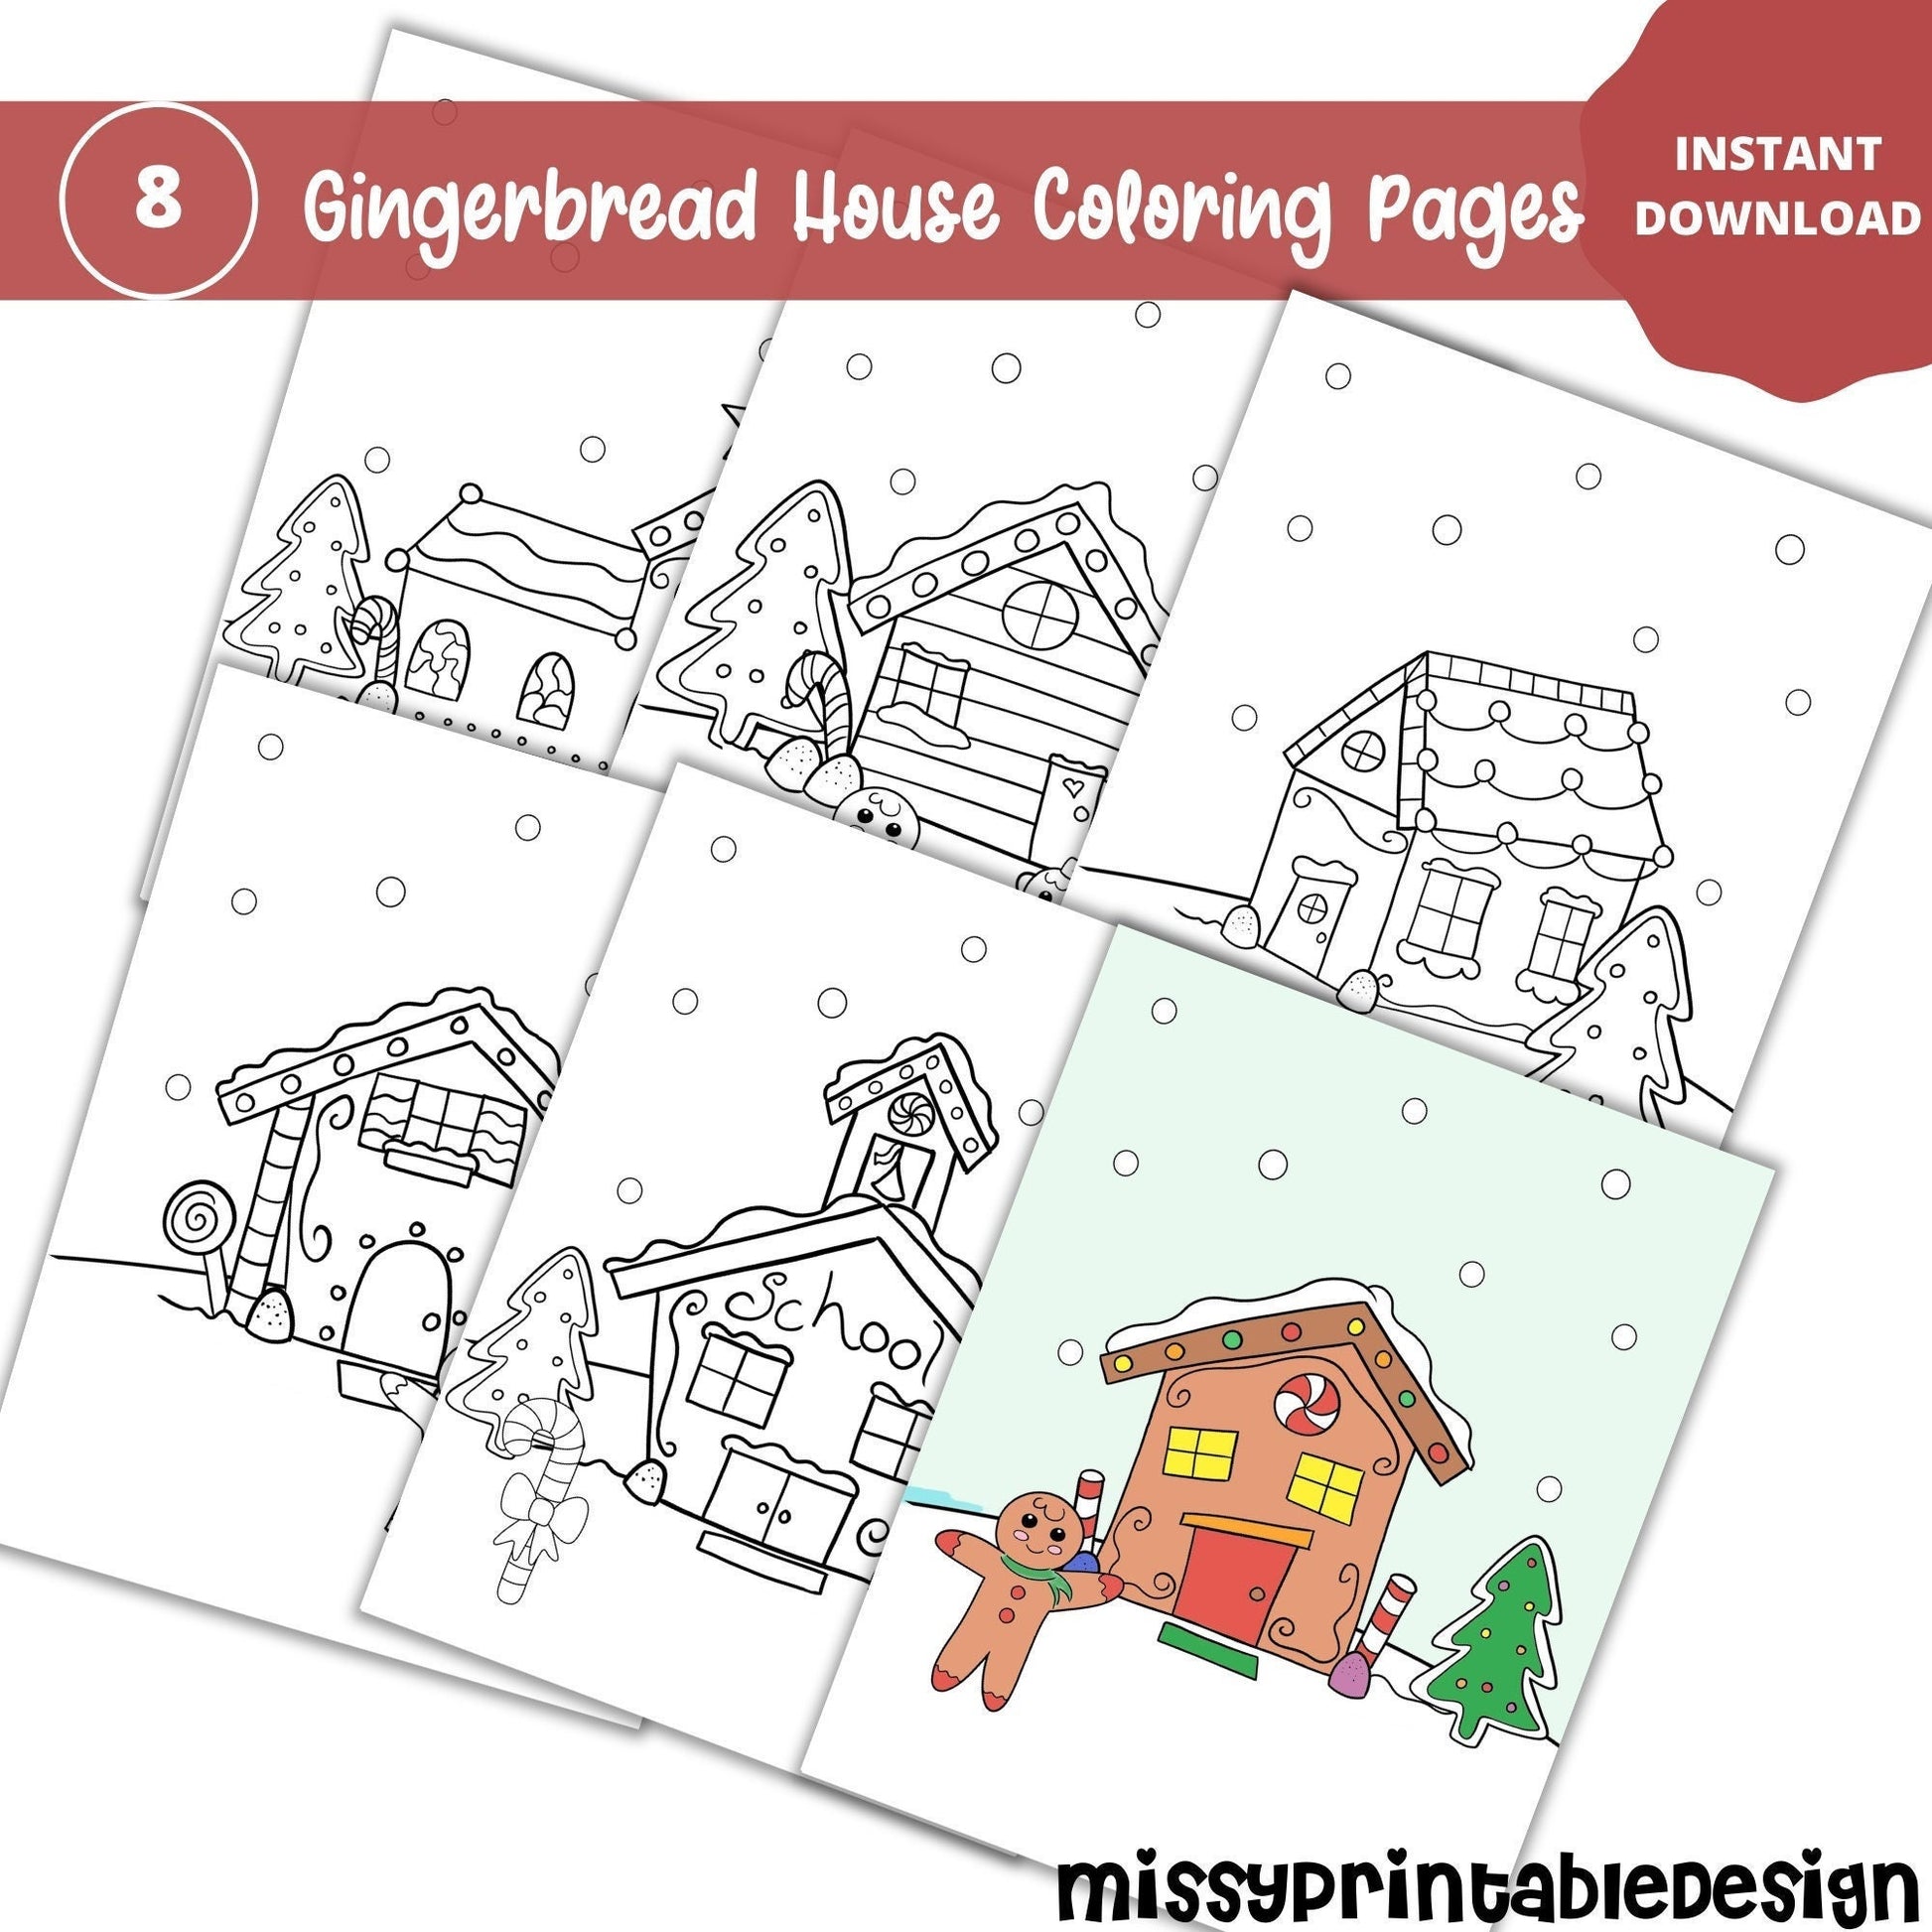 Gingerbread House Coloring Pages, Printable Christmas Coloring Pages, Christmas Party Activity, Holiday Coloring Pages, Kids Coloring Pages